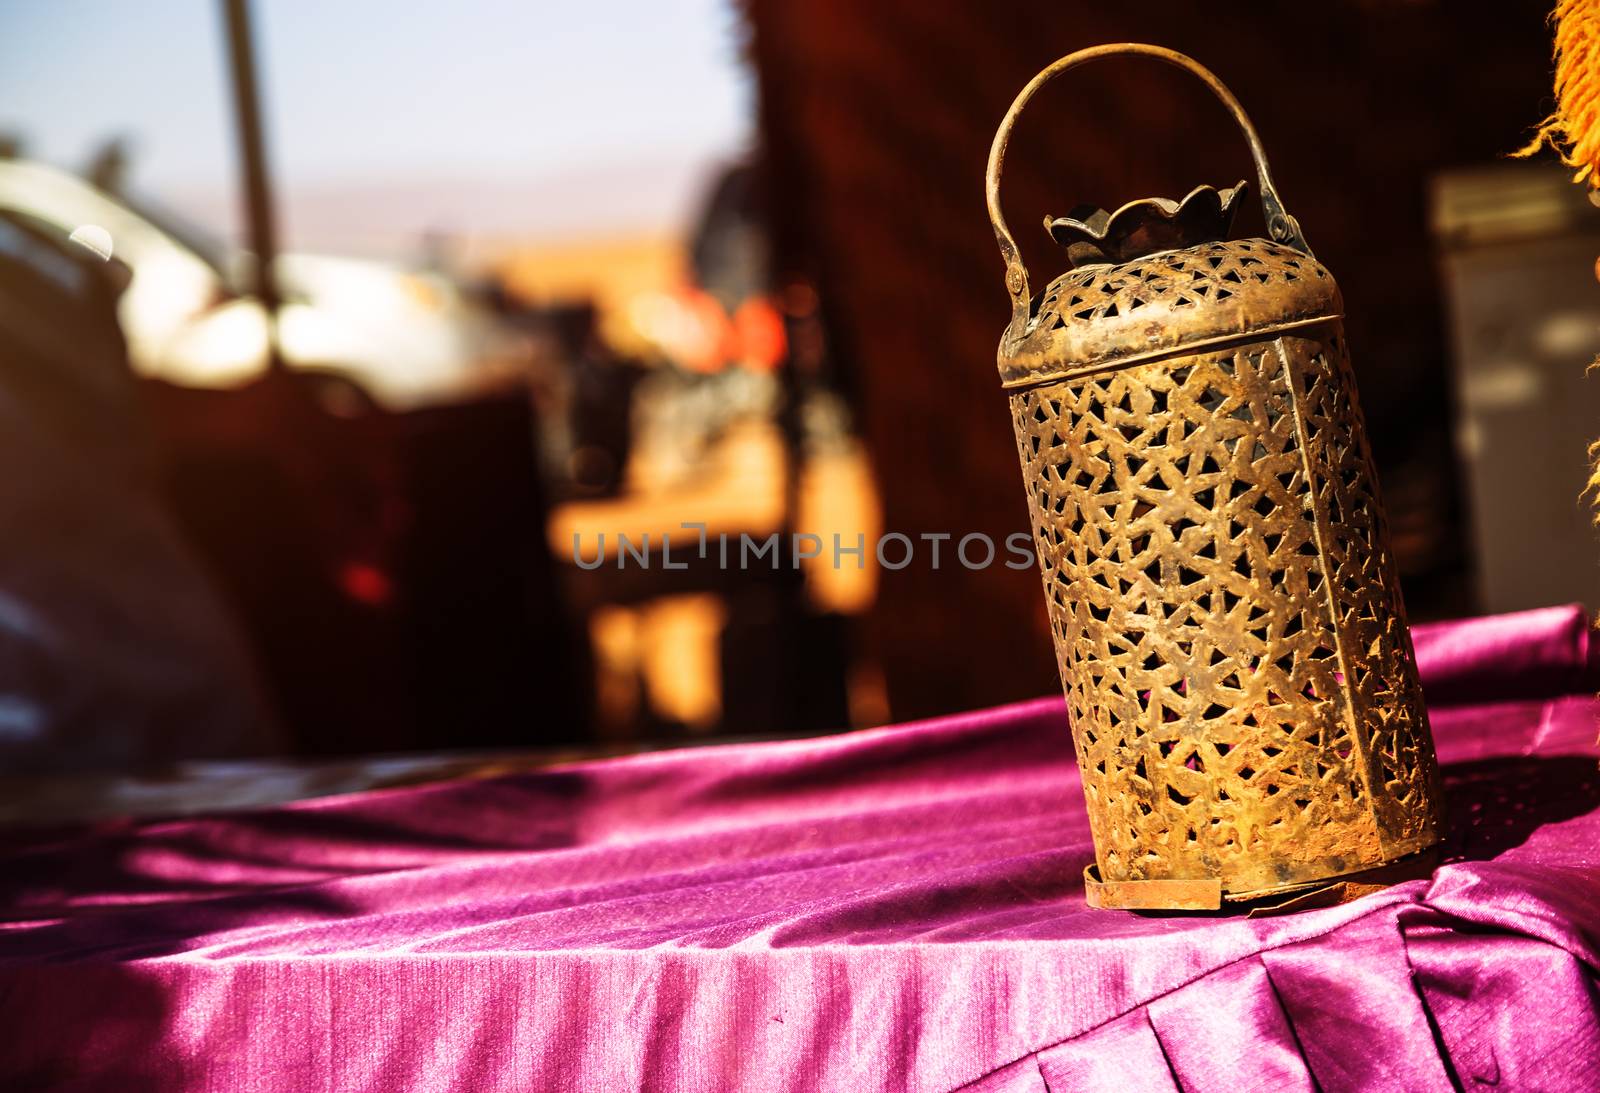 wrought iron berber lamp with traditional nomad tents on background